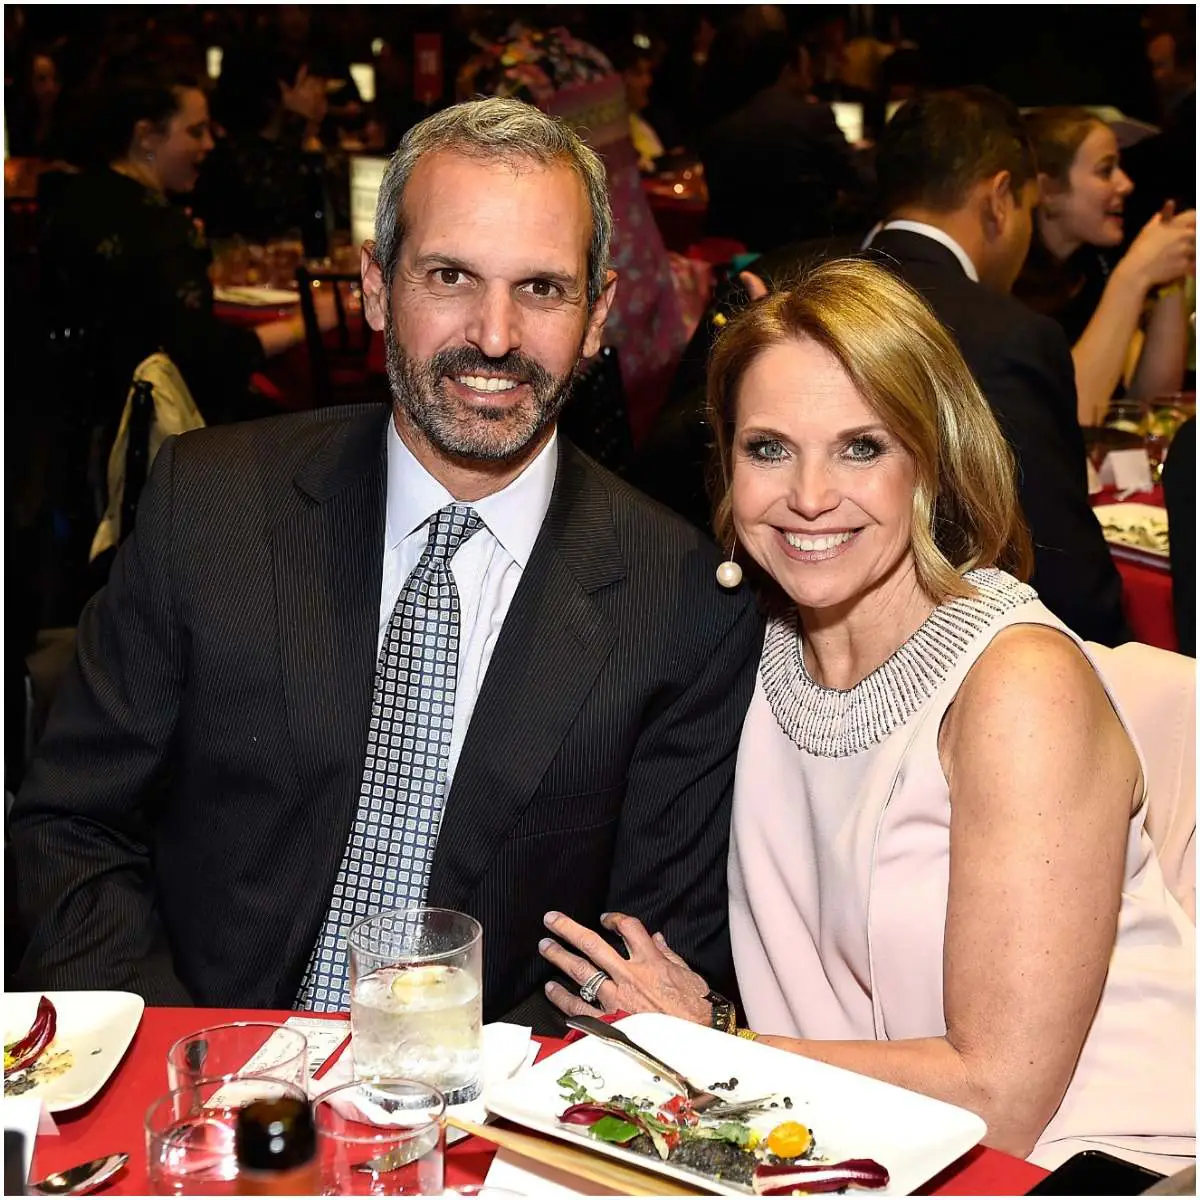 Katie Couric and her husband John Molner